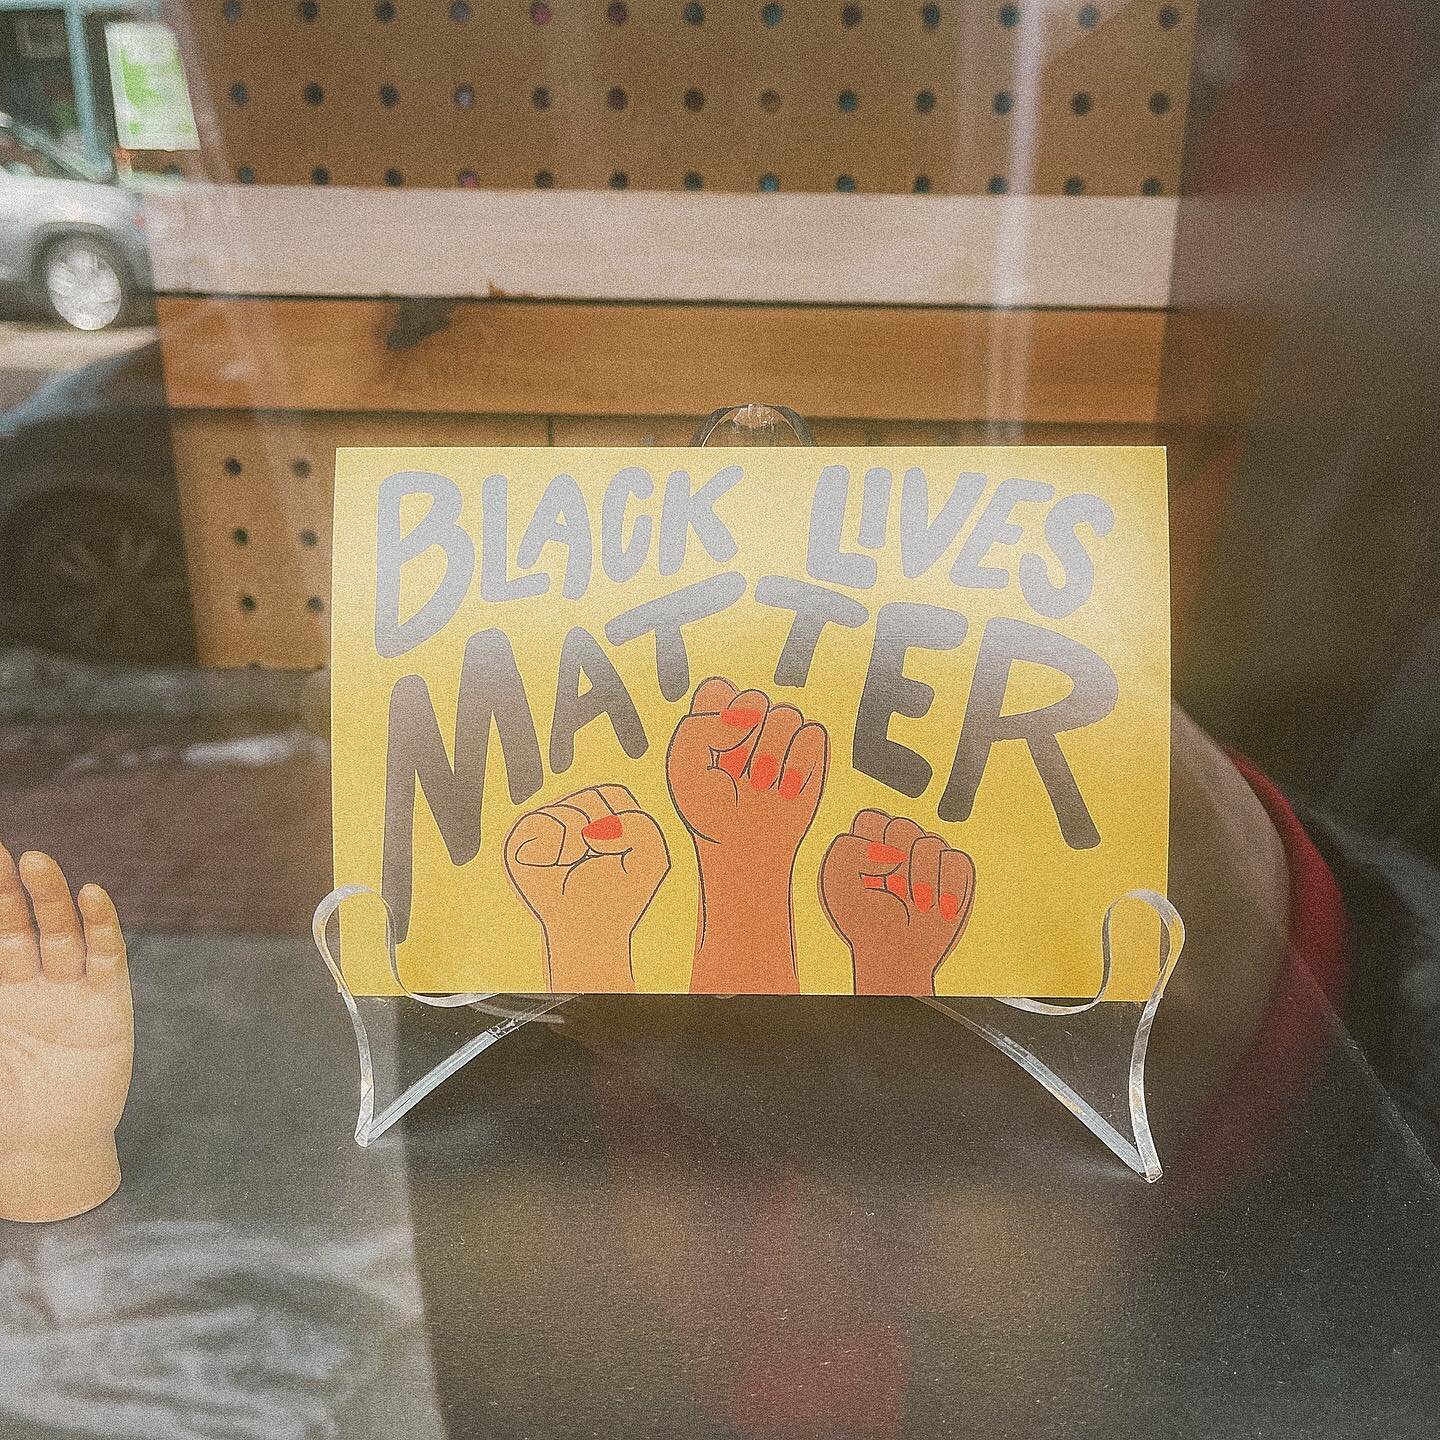 Every month, every day, #BlackLivesMatter ✊🏿✊🏾✊🏽✊🏼✊🏻